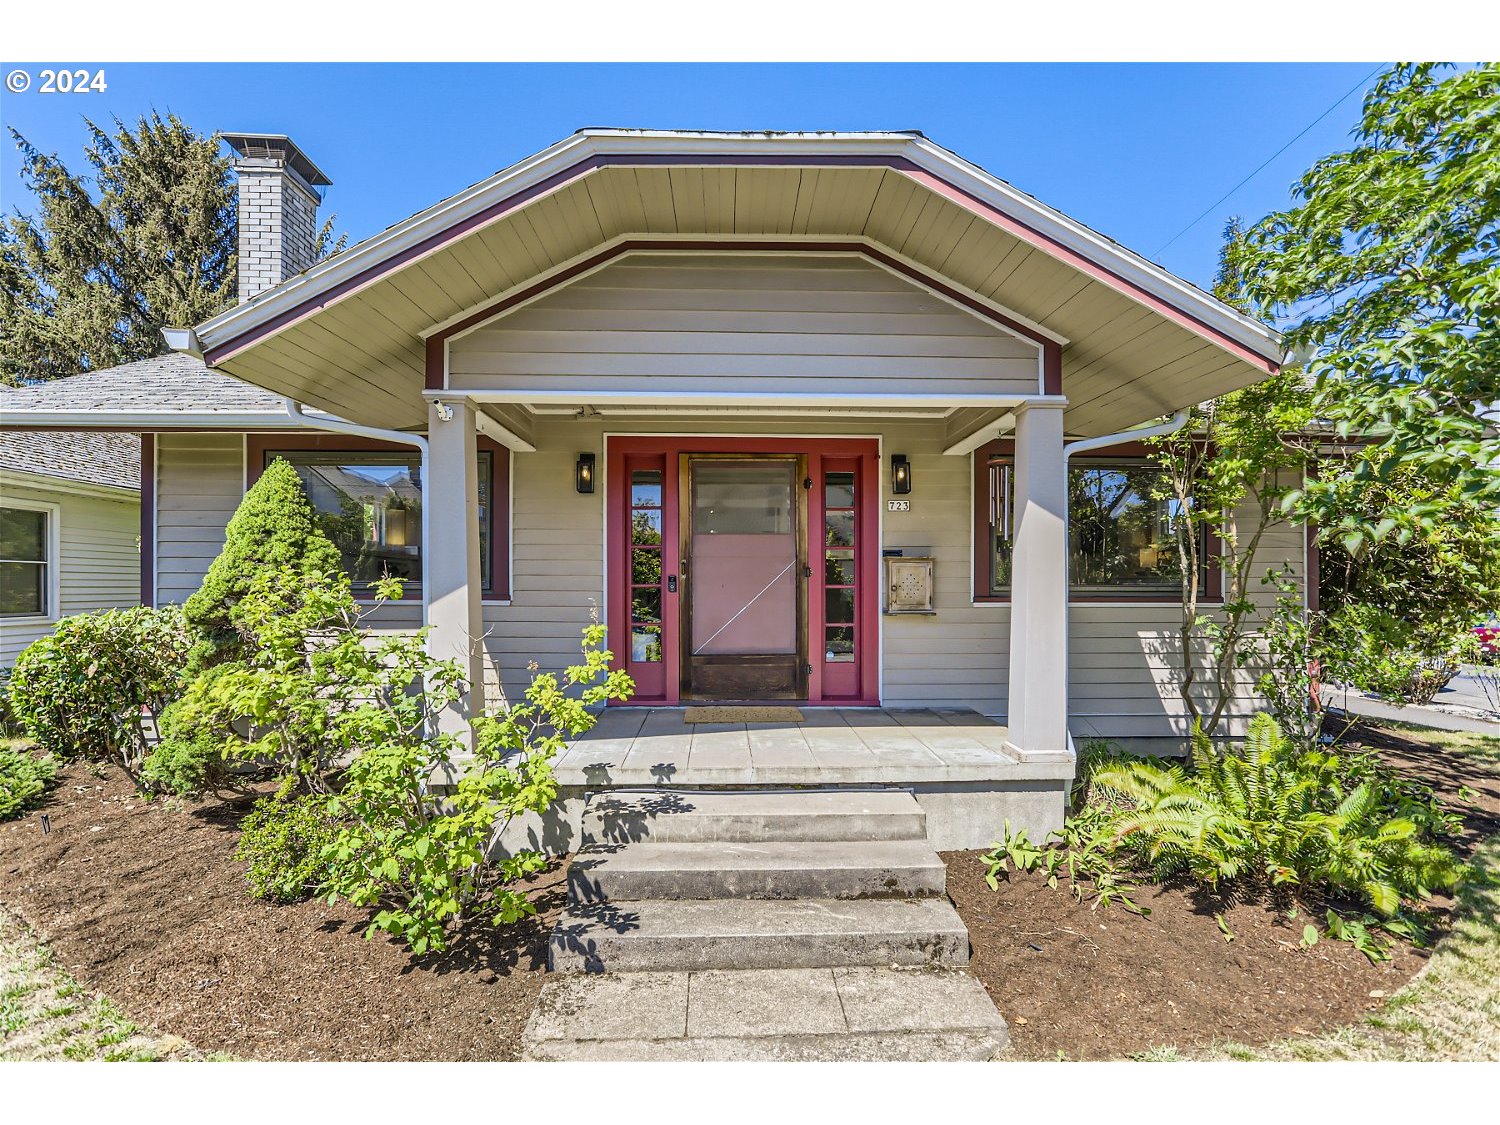 **OPEN 7/23 11AM-1PM** Enjoy a blend of historical charm, craftsmanship & a sense of community in popular N Tabor. Mins from Mt Tabor park, golf course, local pubs/eateries with easy access to freeways, airport, mass transit. Short drive to downtown PDX & popular new Vancouver waterfront. This classic beauty is light filled with classic features such as wood flooring, built-ins, formal dining, spacious living room with two bedrooms on the main floor & two on the upper level. Enjoy a breakfast nook in the kitchen along with updated SS appls & gas range. Remodeled oversized bathroom with soaking tub & shower. ADU potential in the unfinished basement with high ceilings. Low maintenance fenced back yard bordering custom patio. [Home Energy Score = 4. HES Report at https://rpt.greenbuildingregistry.com/hes/OR10230897]